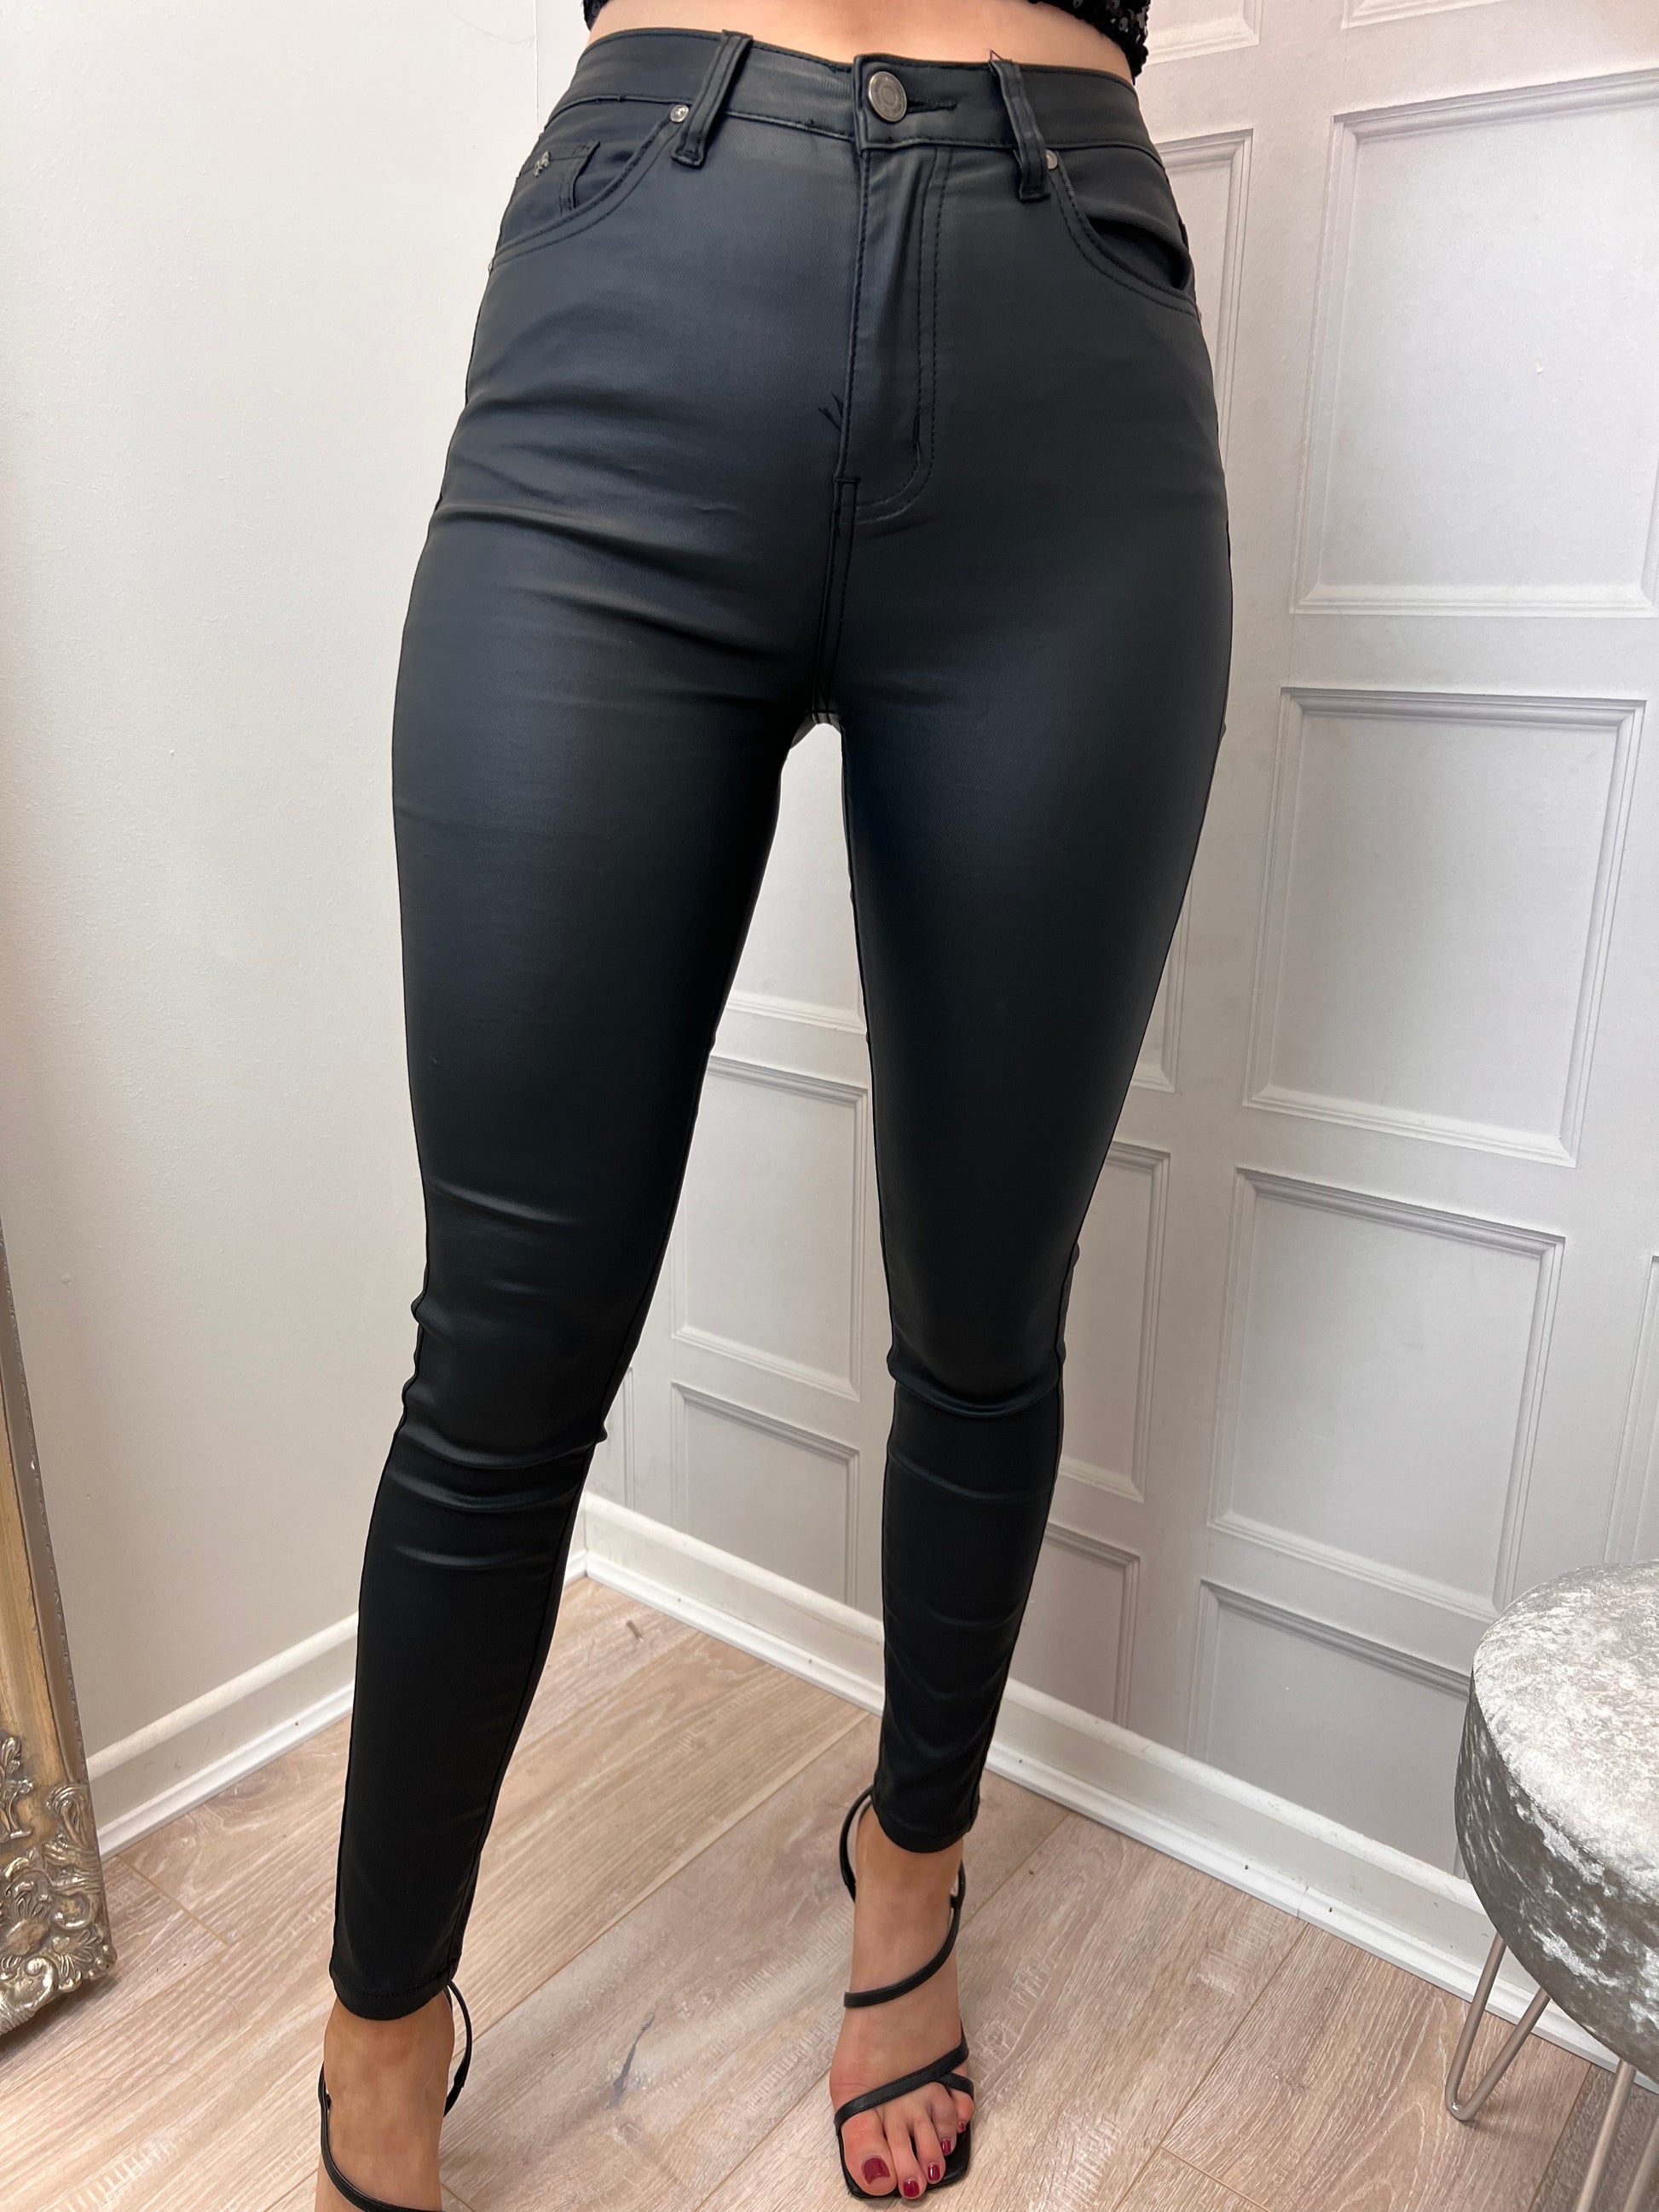 Tall Leather Look High Waist Skinny Trousers